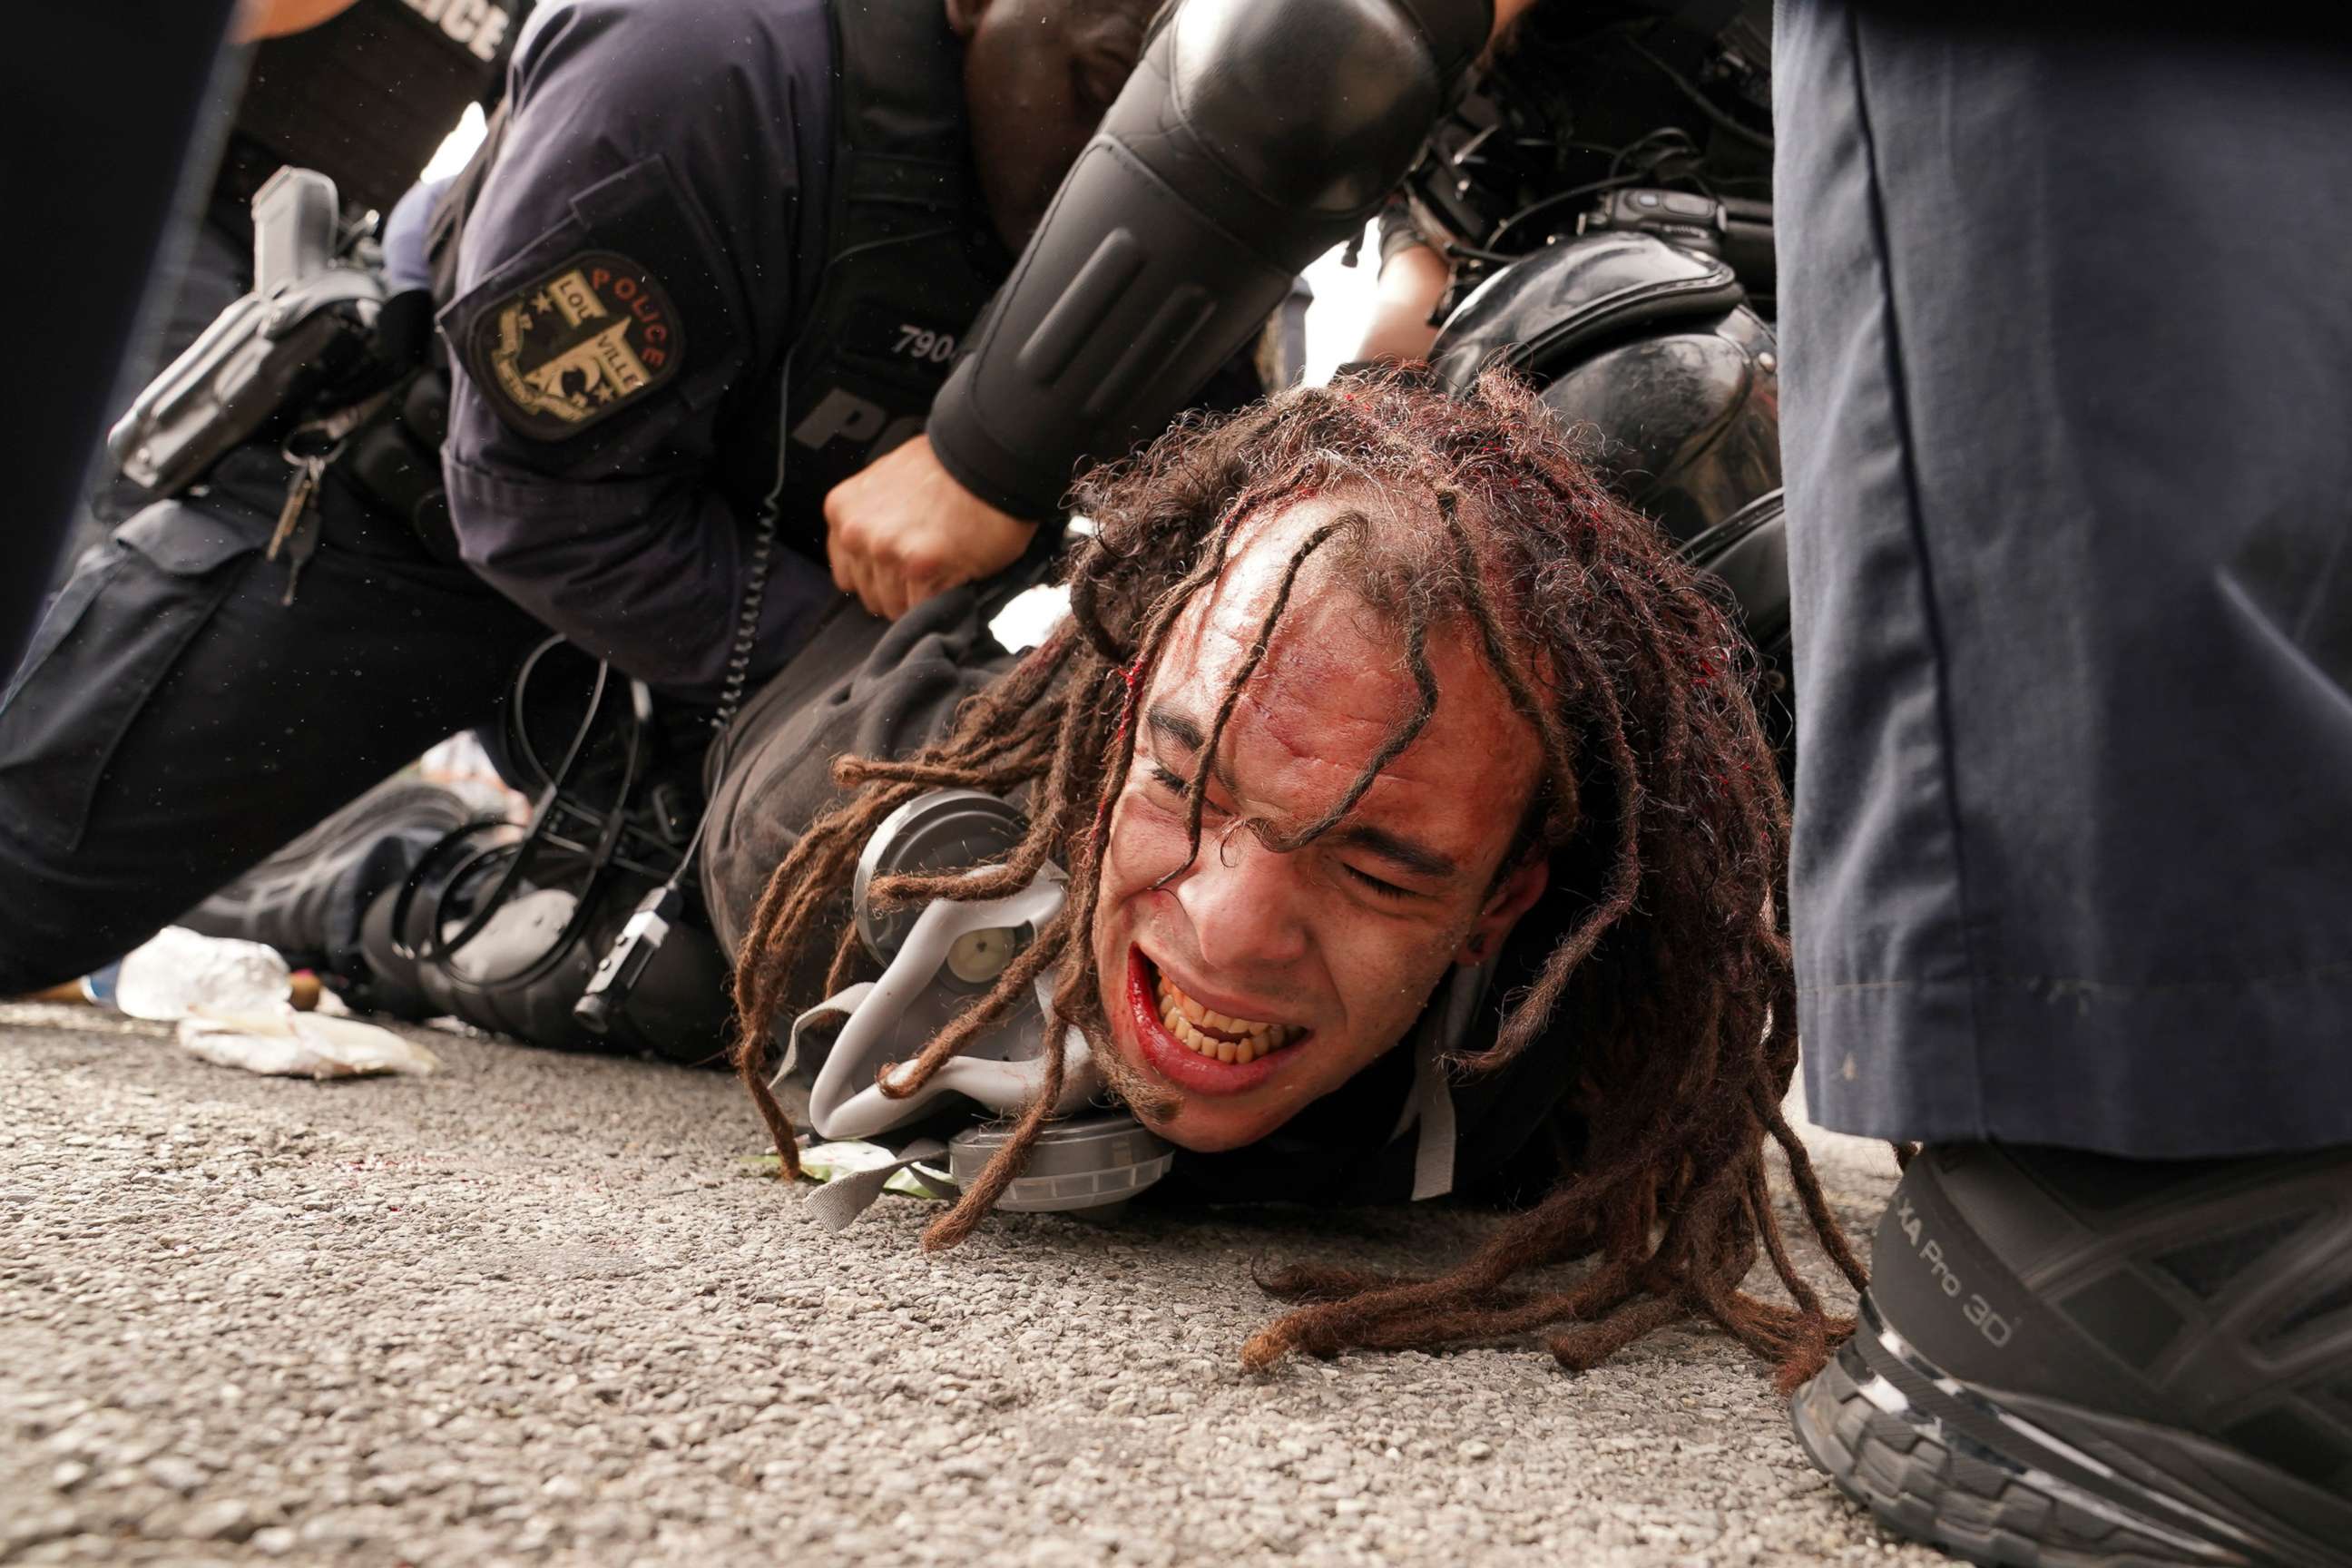 PHOTO: Louisville police detain a man after a group marched, Sept. 23, 2020, in Louisville, Ky. A grand jury indicted one officer on criminal charges six months after Breonna Taylor was fatally shot by police in Kentucky.